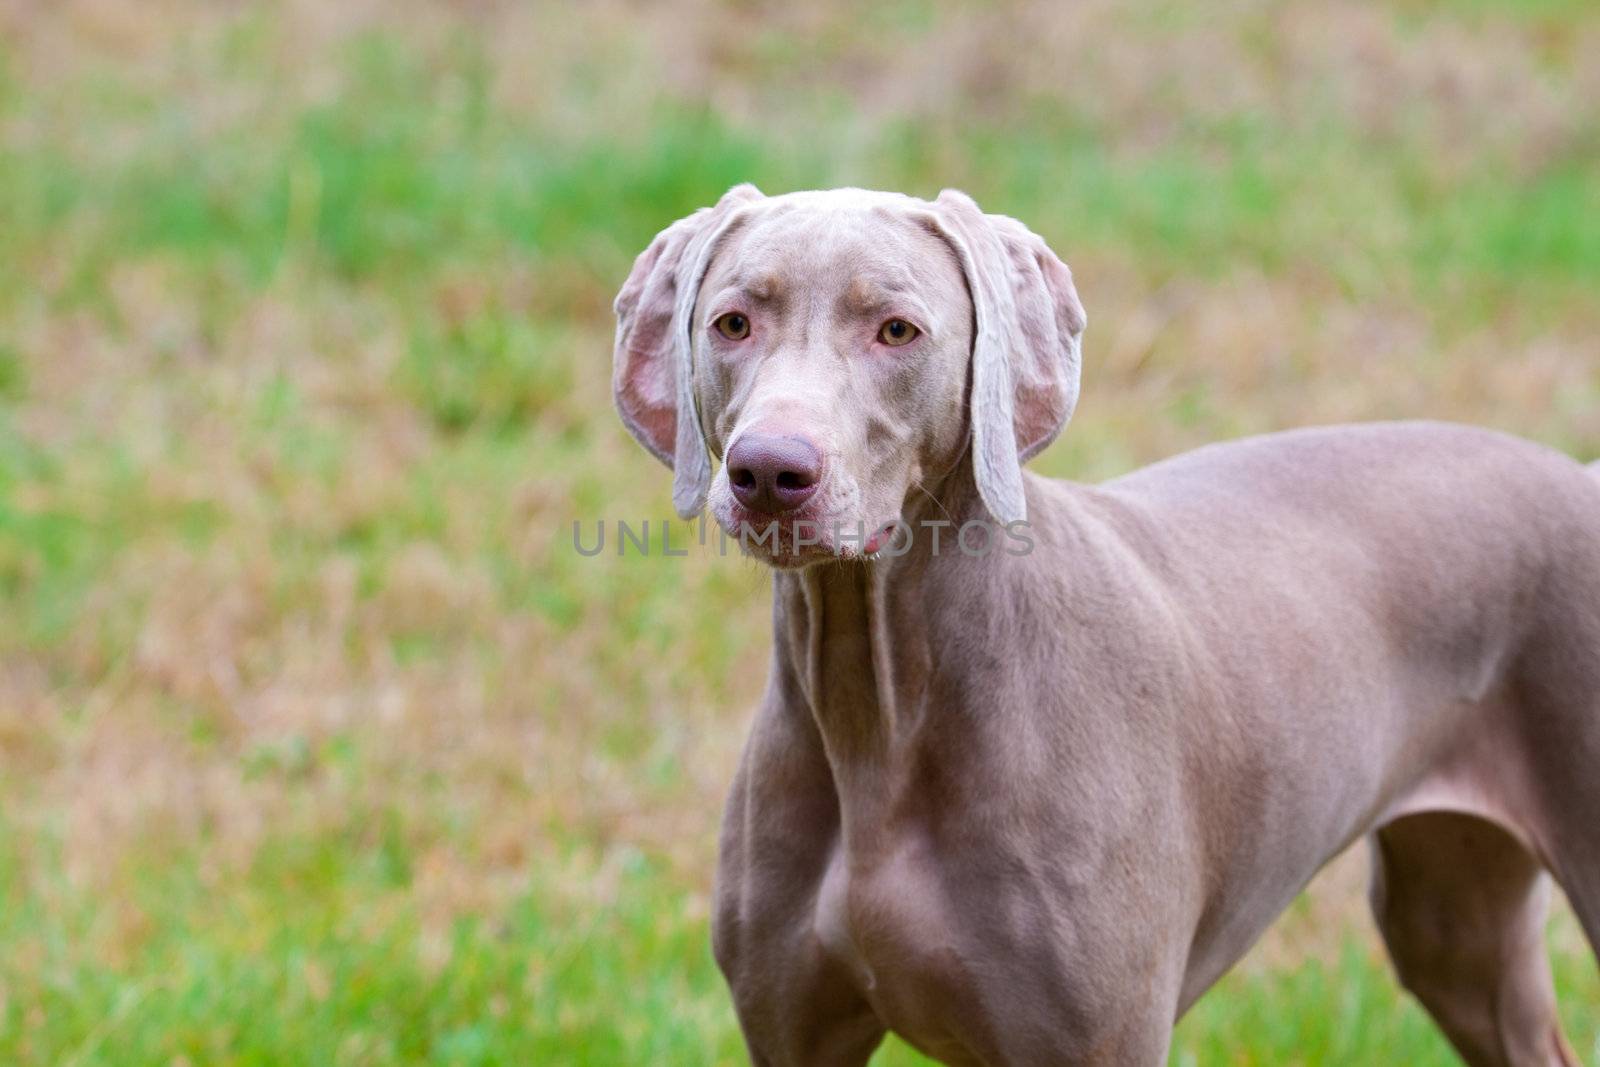 A weimaraner stands in a field looking at some chickens and birds.